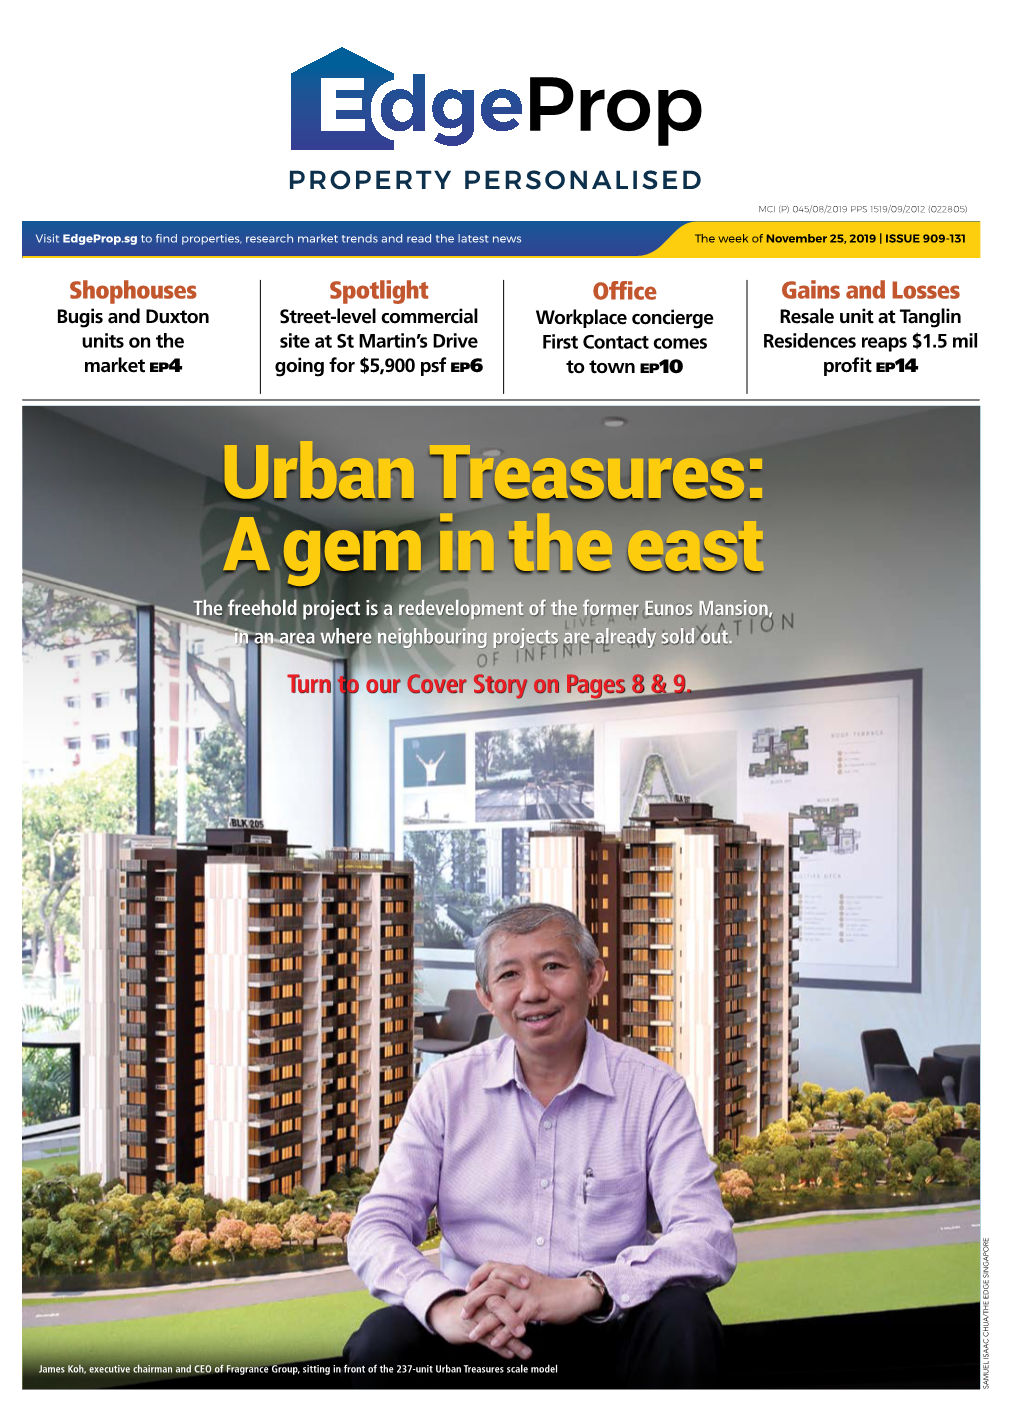 Urban Treasures: a Gem in the East the Freehold Project Is a Redevelopment of the Former Eunos Mansion, in an Area Where Neighbouring Projects Are Already Sold Out